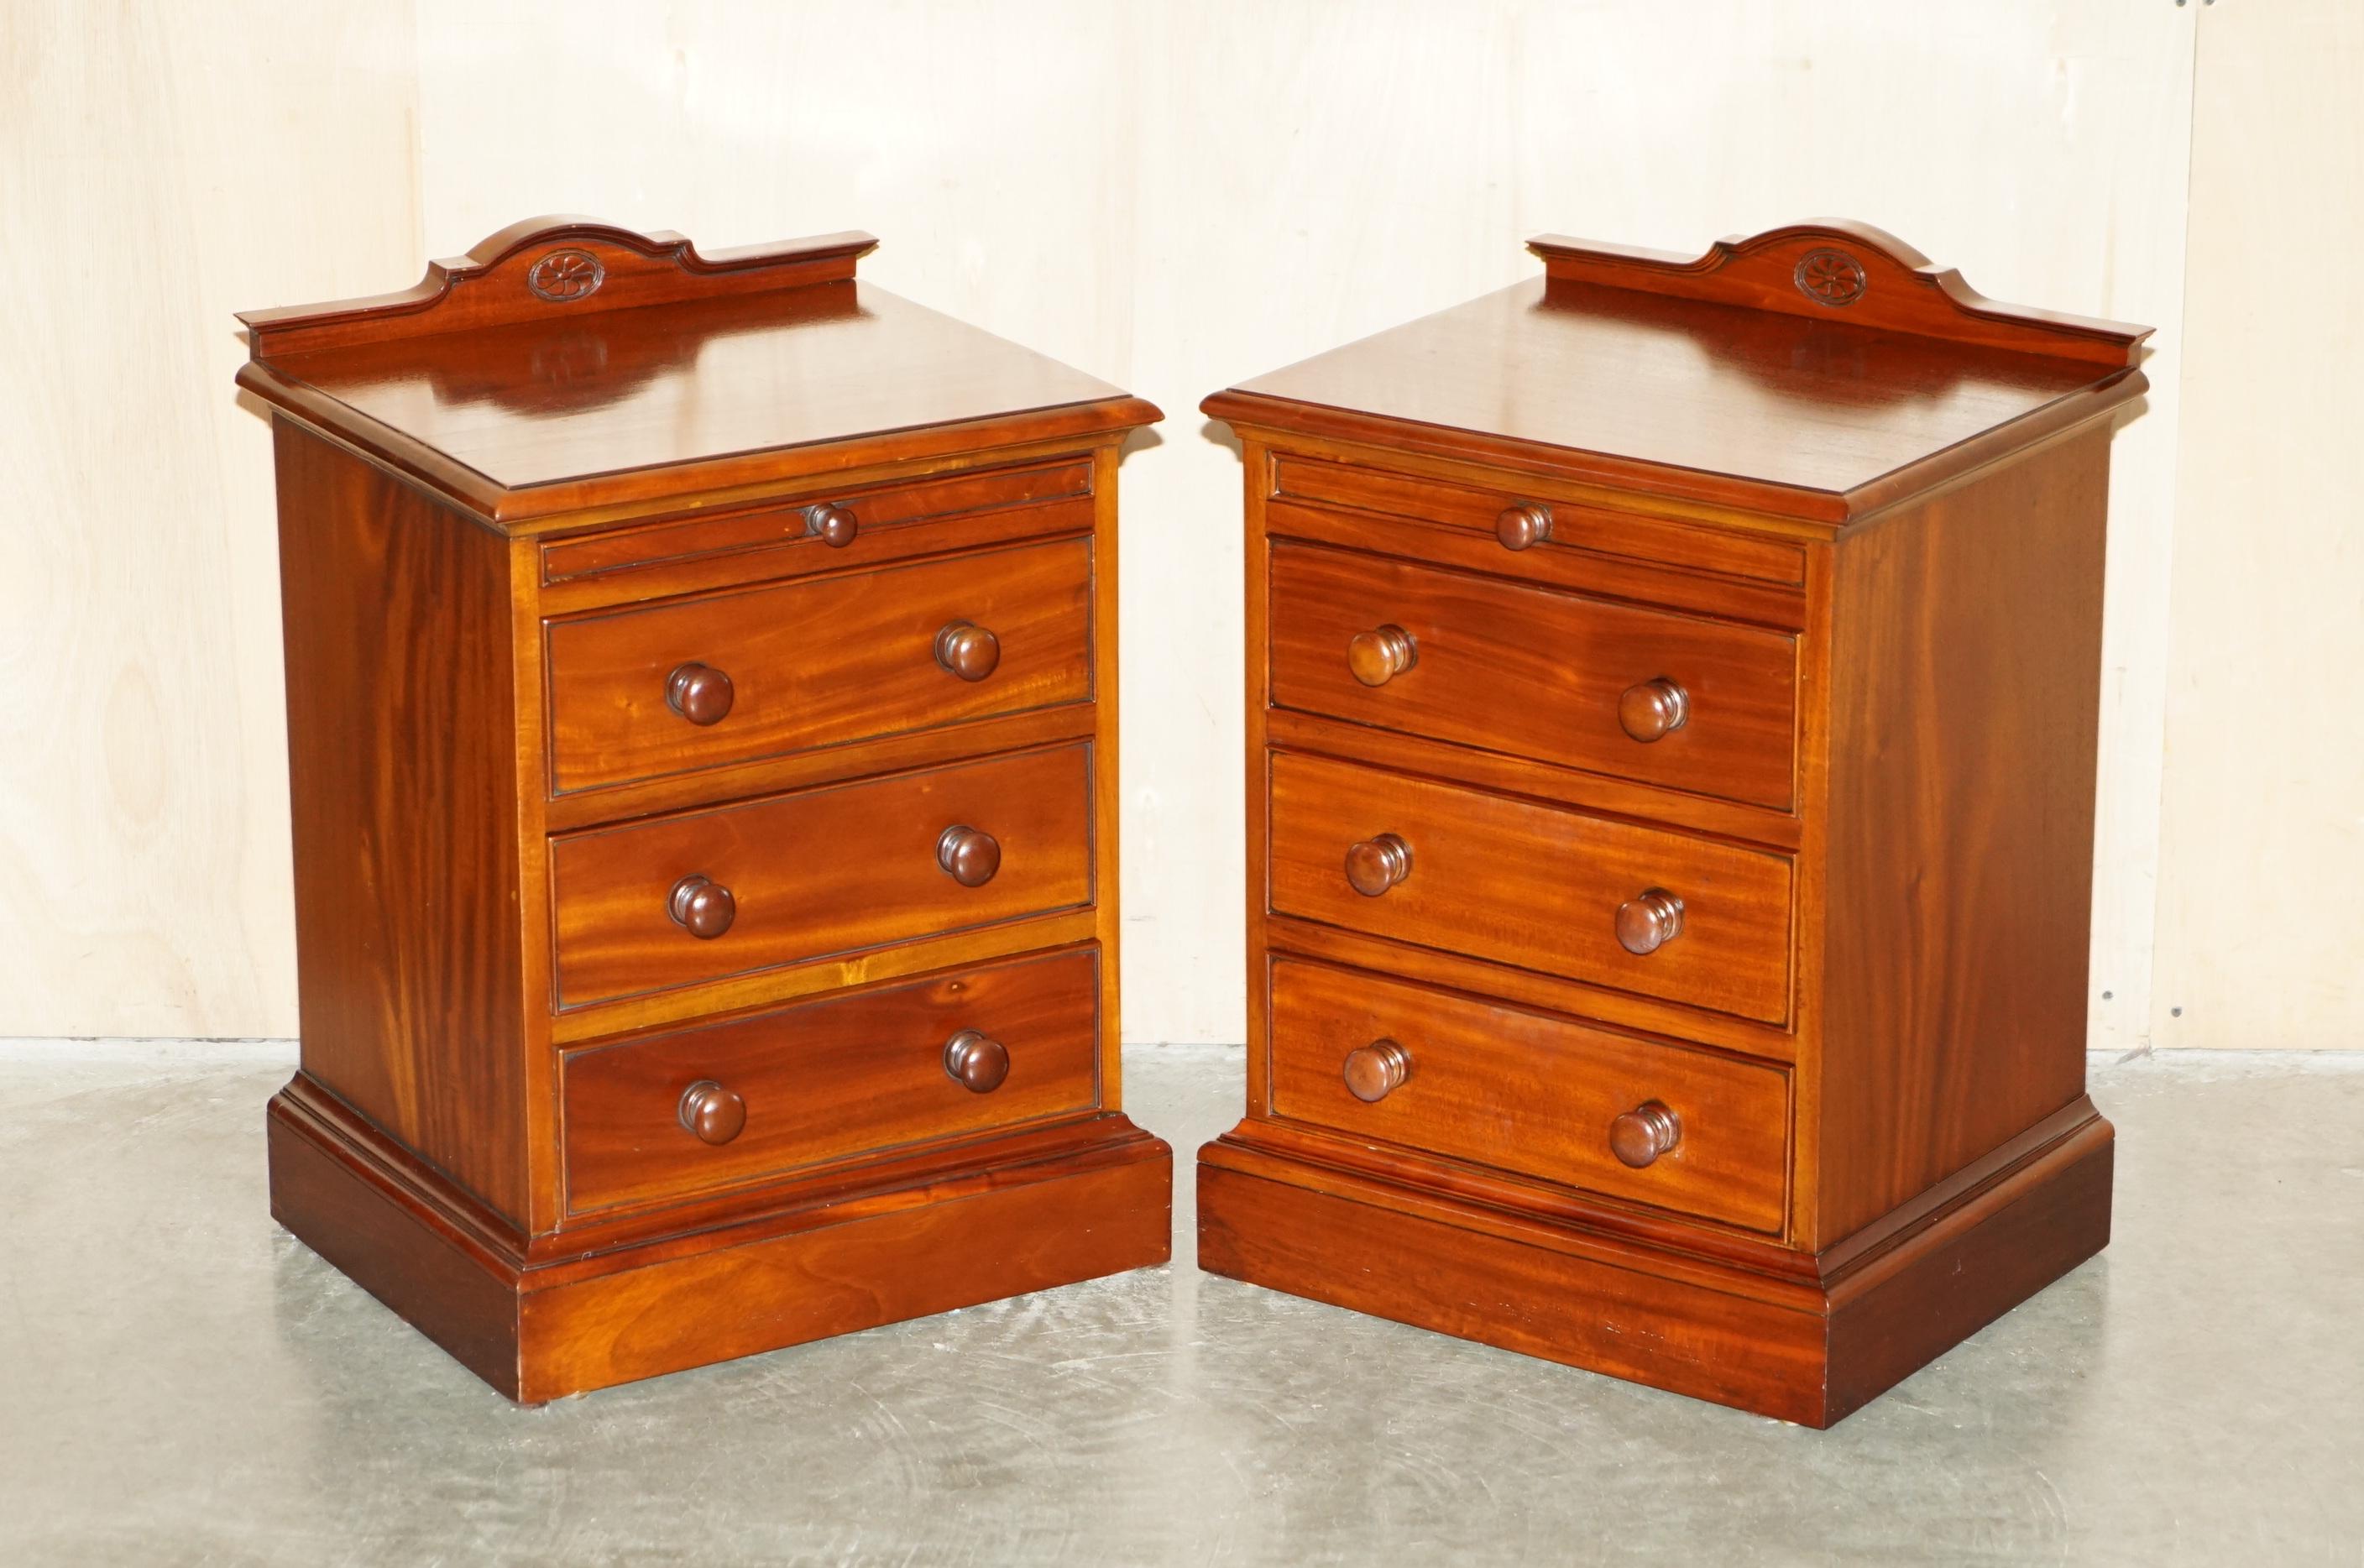 Royal House Antiques

Royal House Antiques is delighted to offer for sale this absolutely stunning pair of vintage circa 1920-1940 flamed mahogany bedside table chests of drawers with slip serving trays 

Please note the delivery fee listed is just